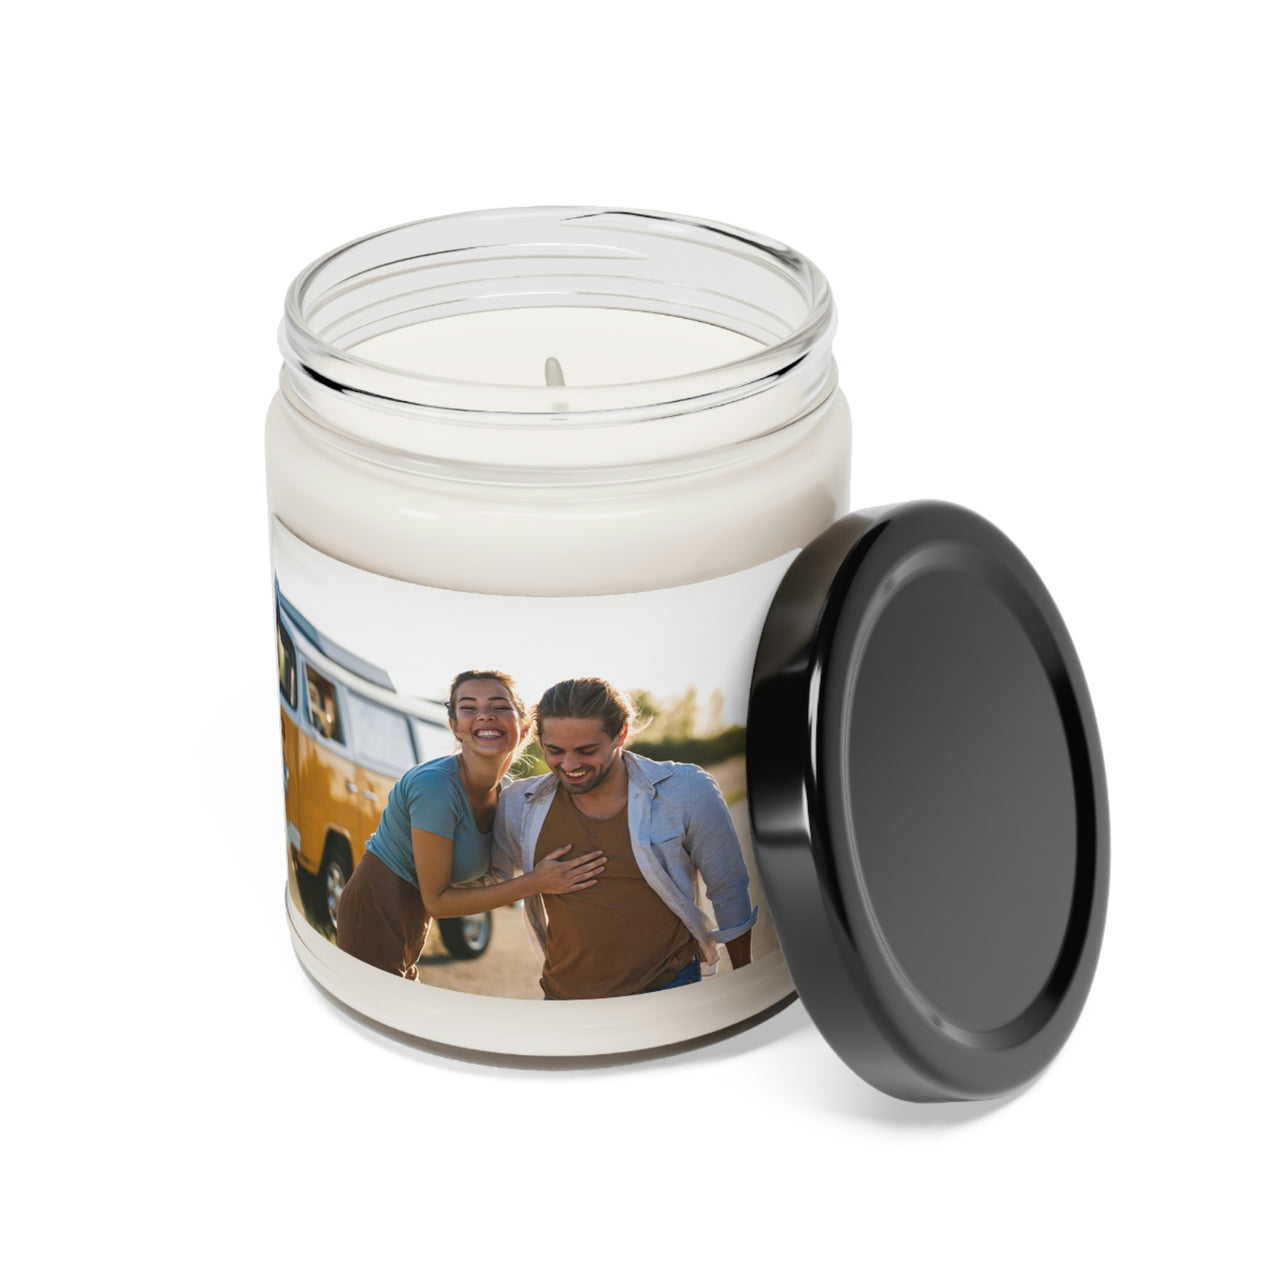 Custom Photo Candle - Personalized Scented Soy Candle